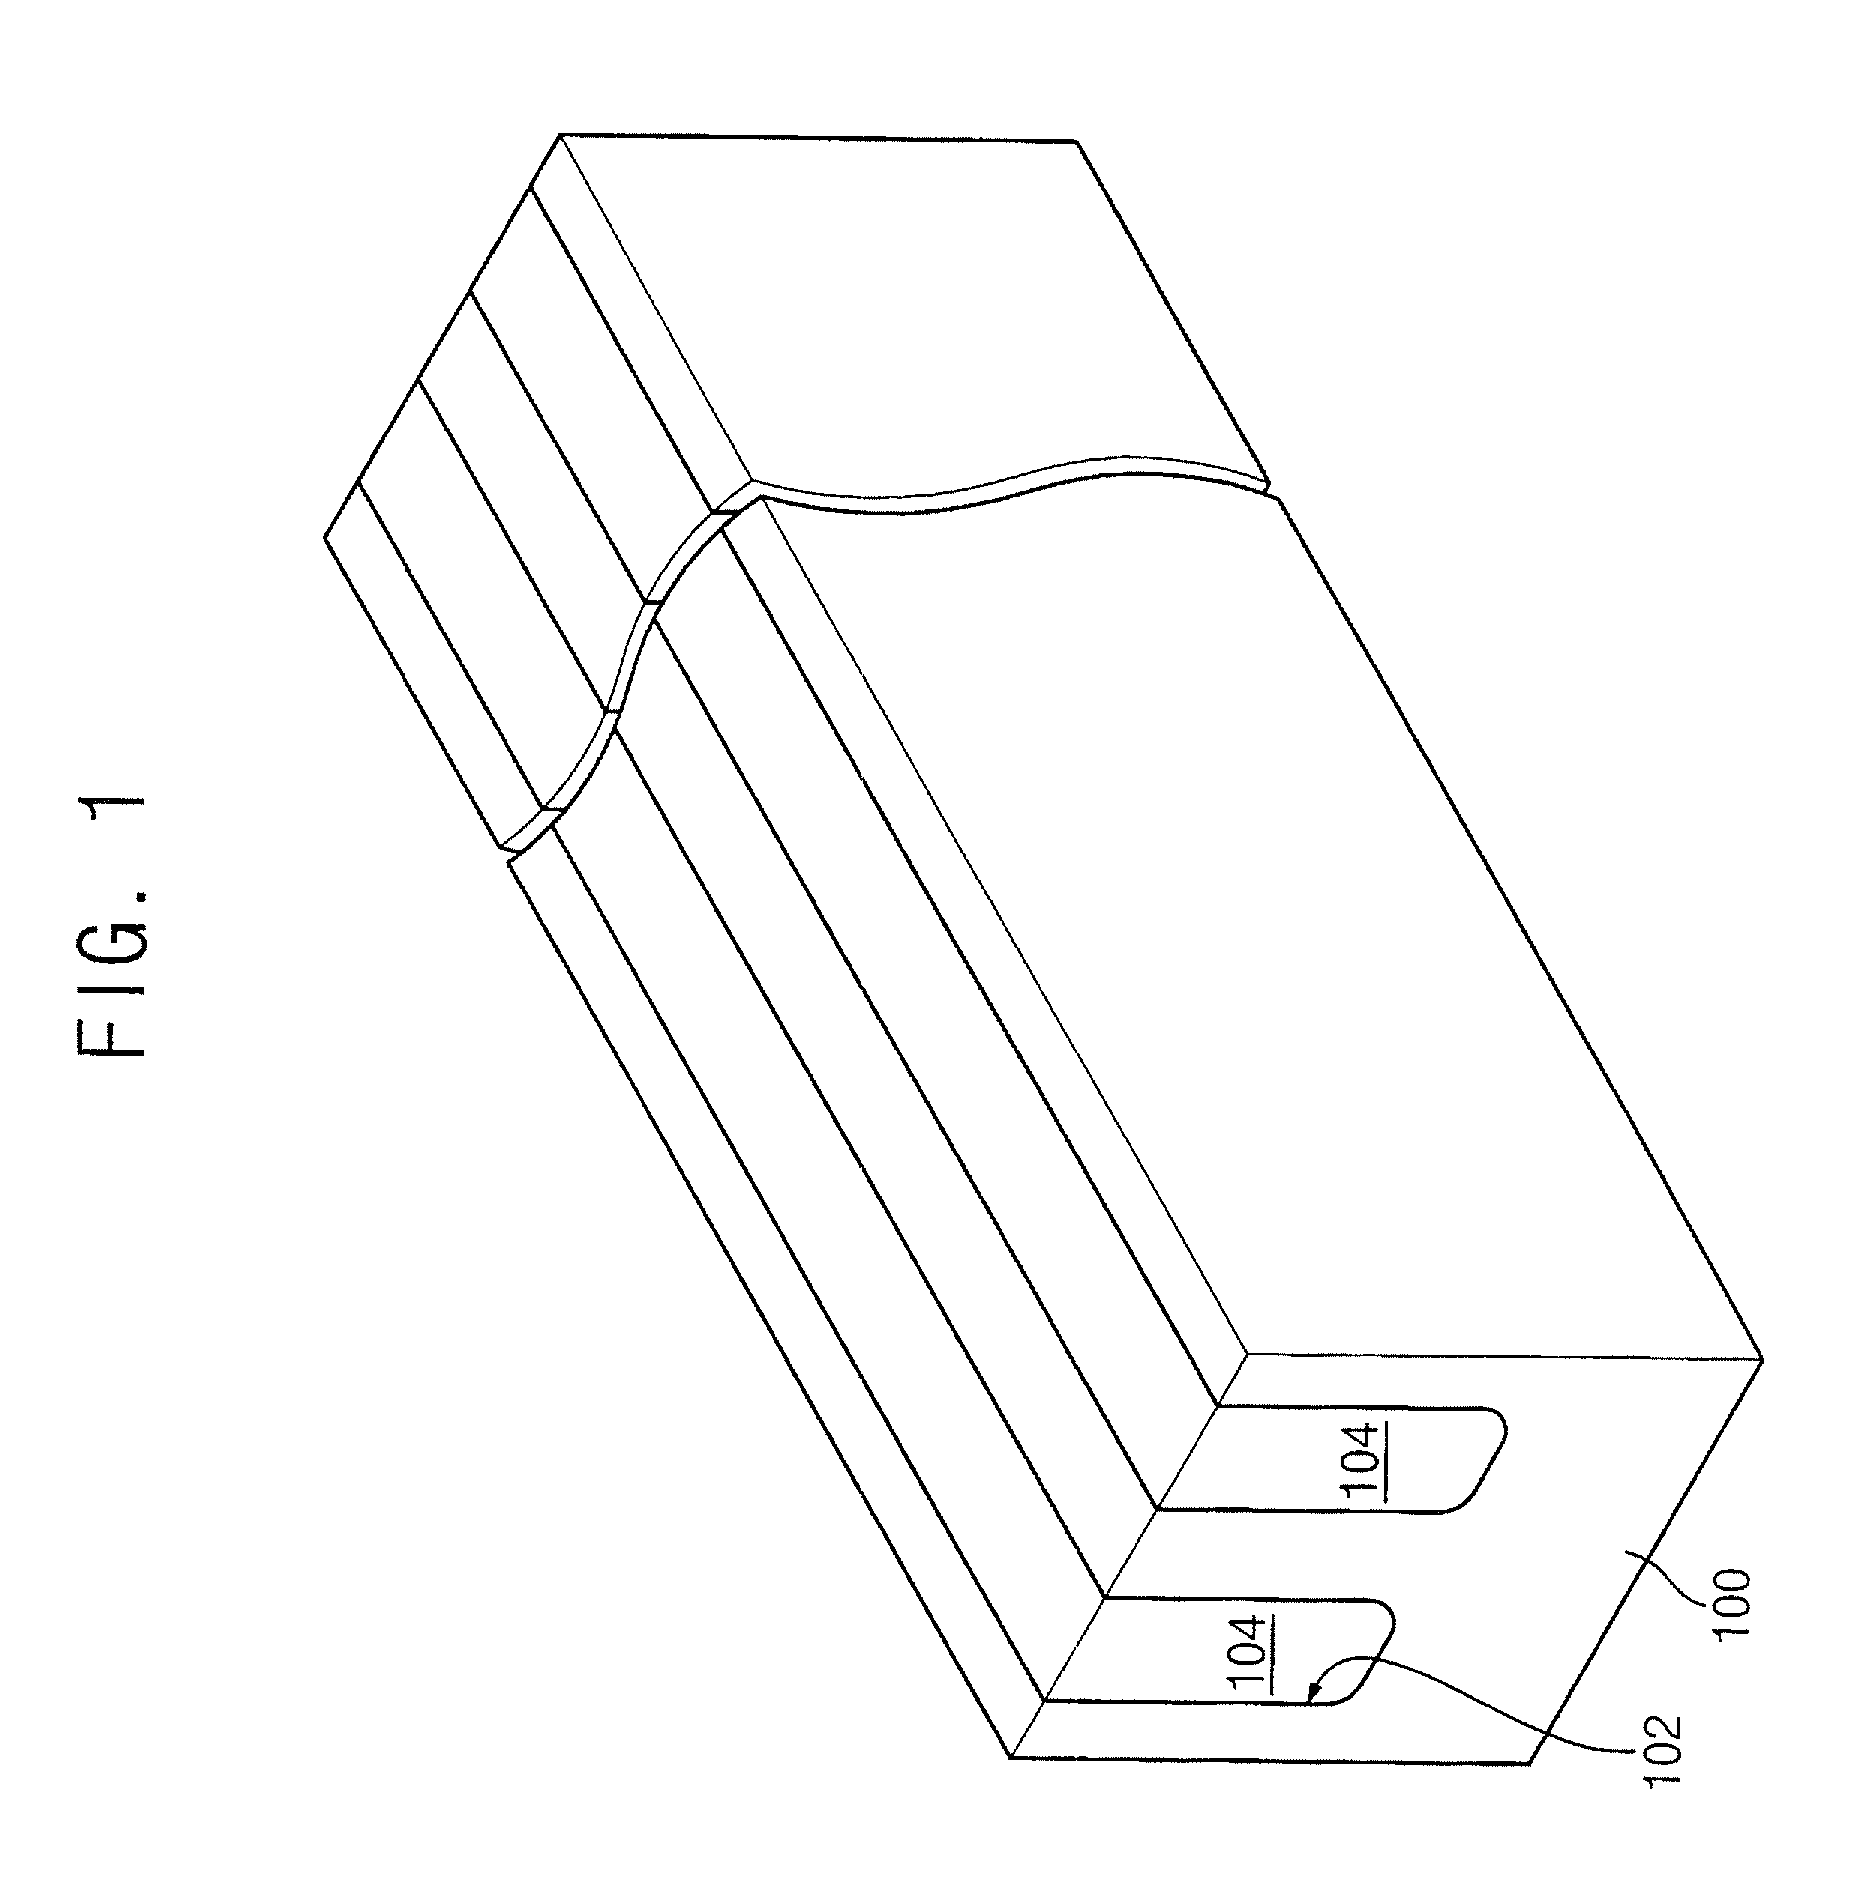 Methods of manufacturing non-volatile memory devices by implanting metal ions into grain boundaries of variable resistance layers, and related devices